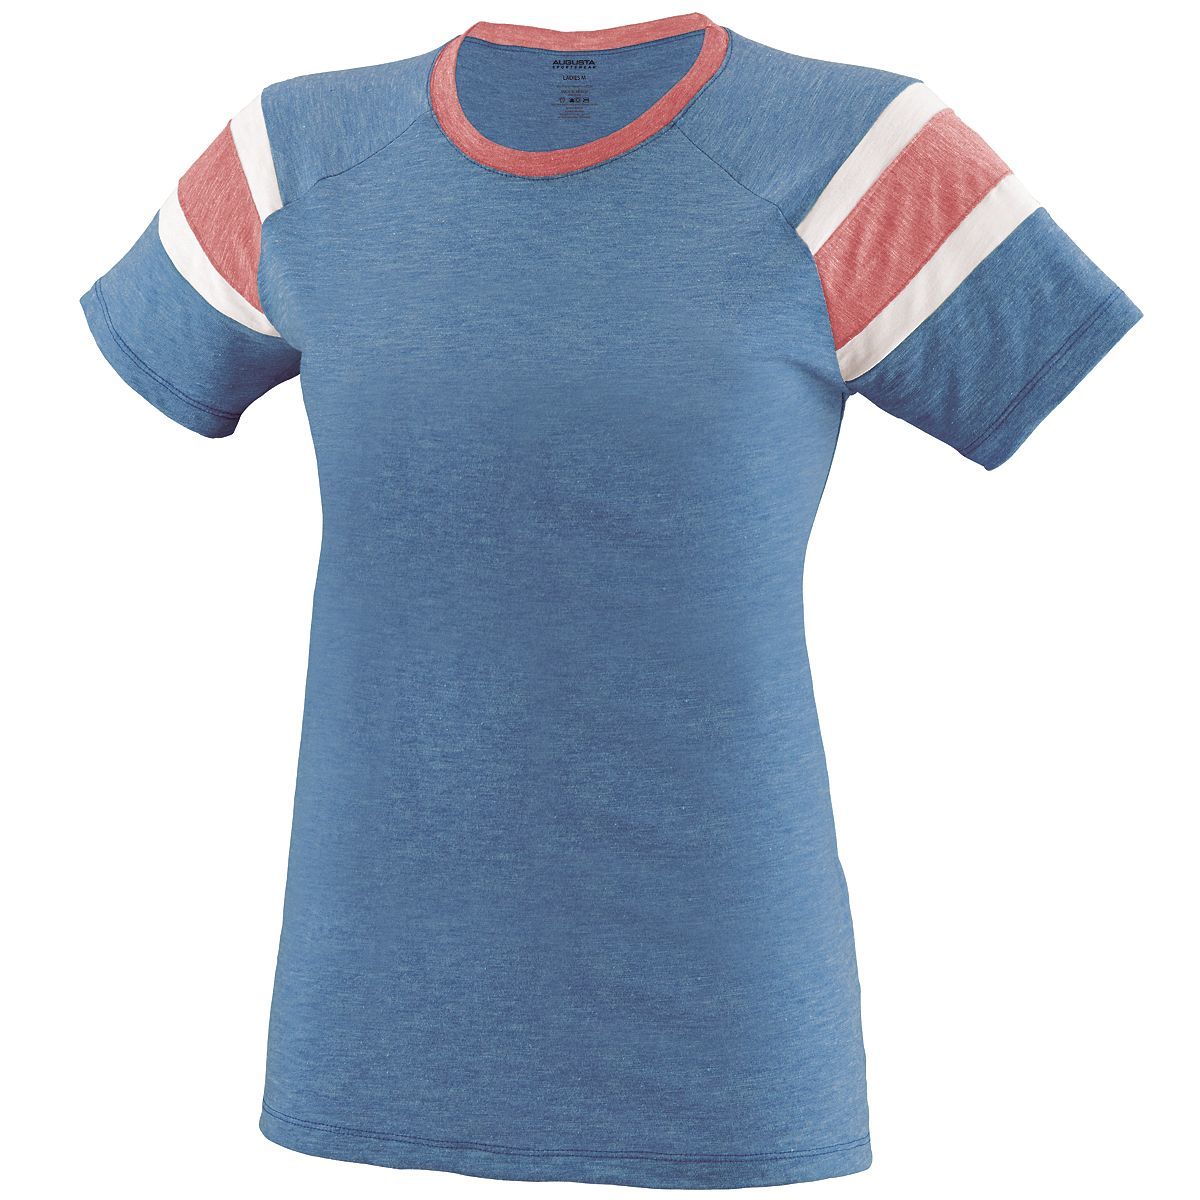 Augusta Sportswear Girls Fanatic Tee in Royal/Red/White  -Part of the Girls, T-Shirts, Augusta-Products, Girls-Tee-Shirt, Shirts product lines at KanaleyCreations.com